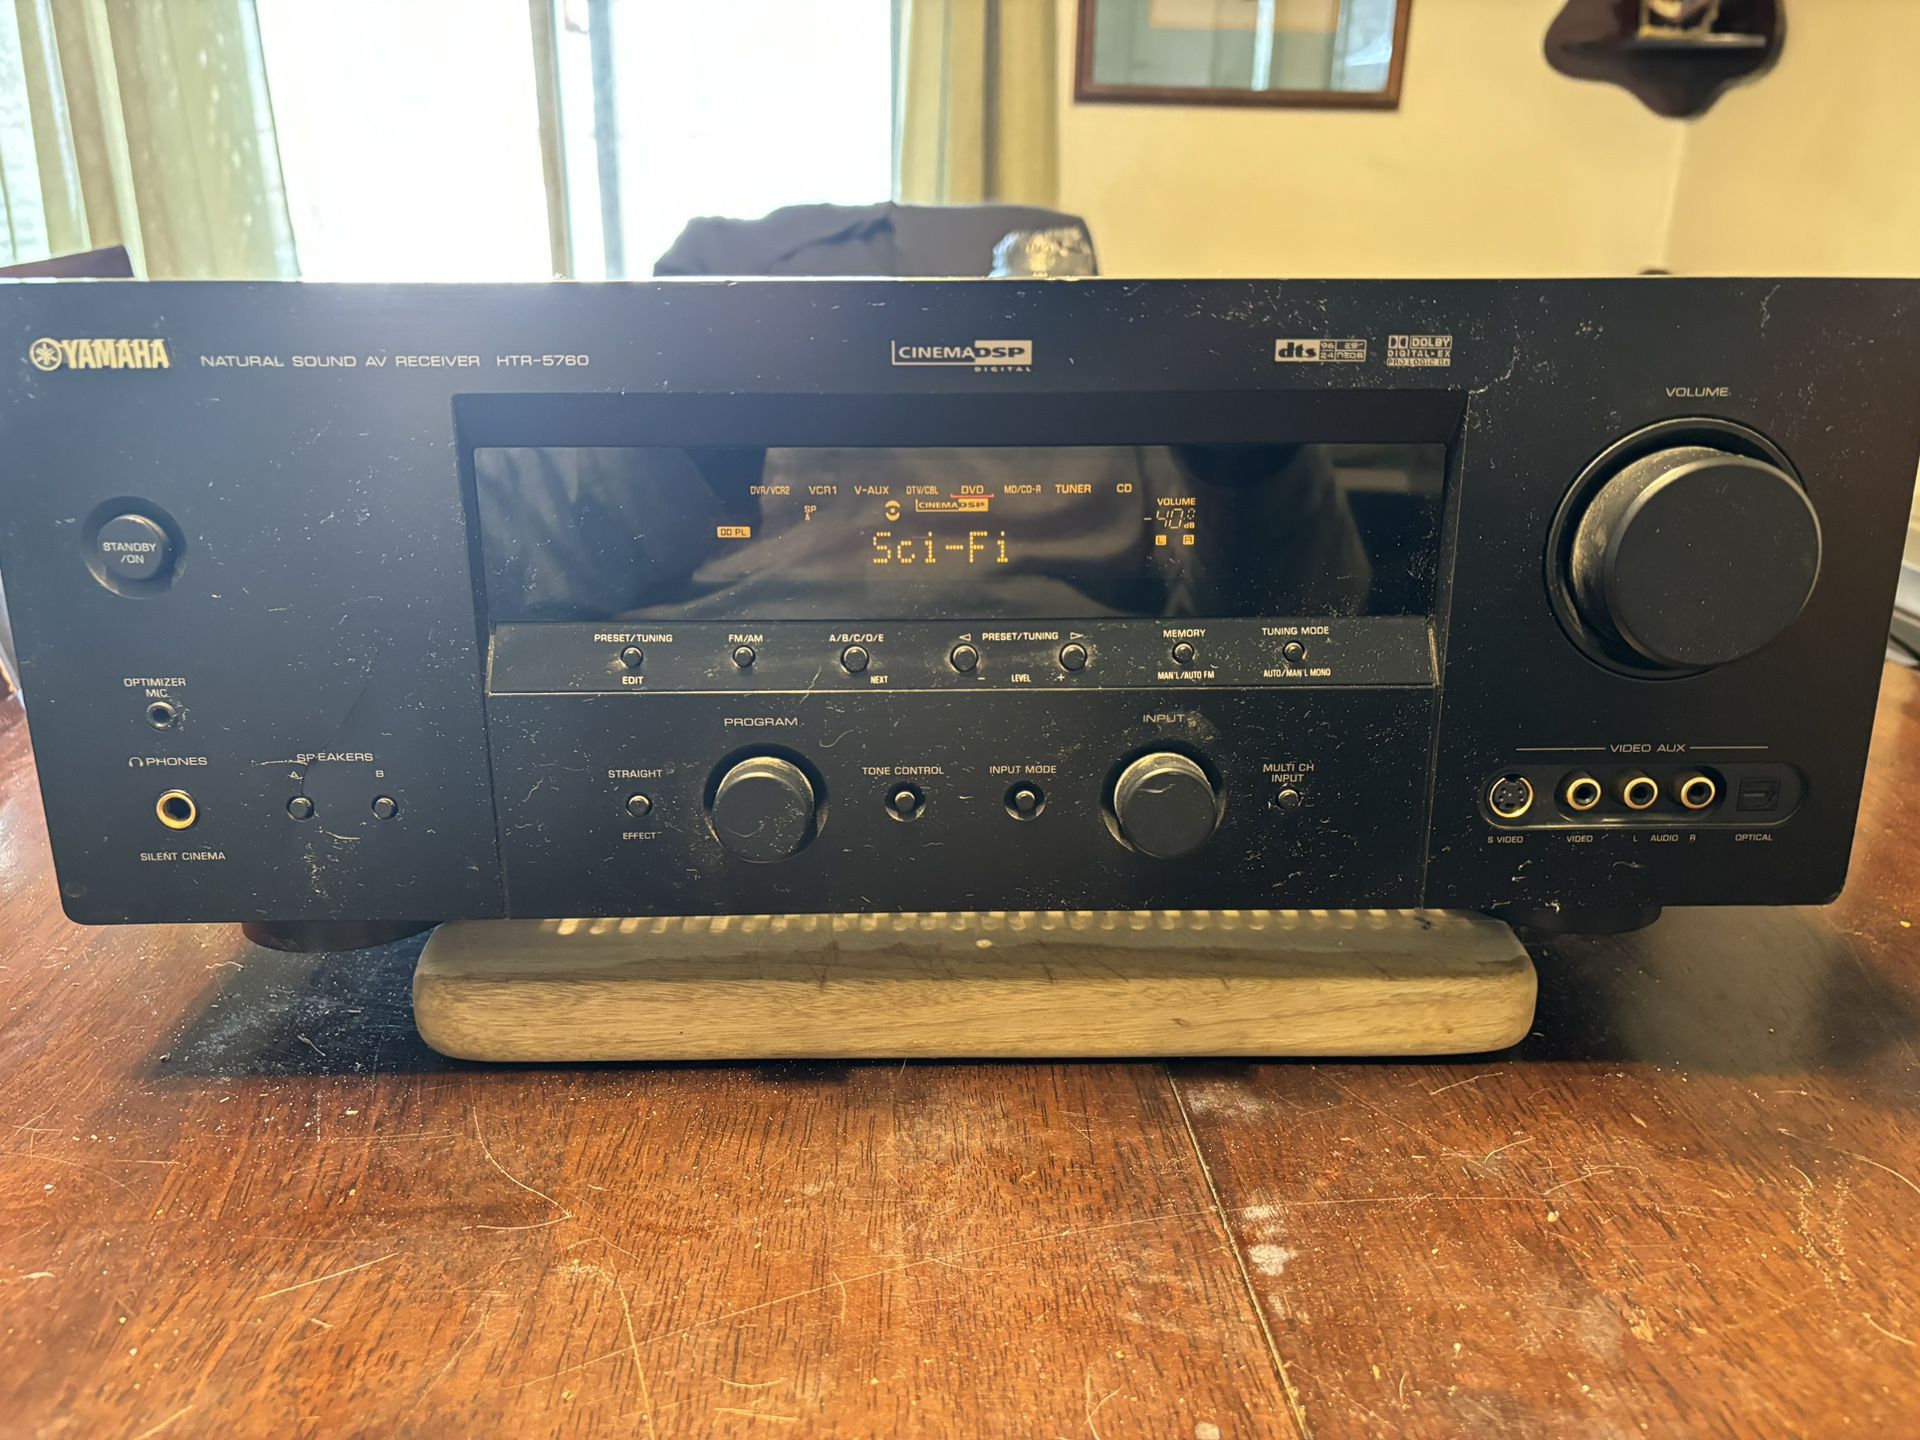 Yamaha Home Theatre Receiver Model HTR-5760